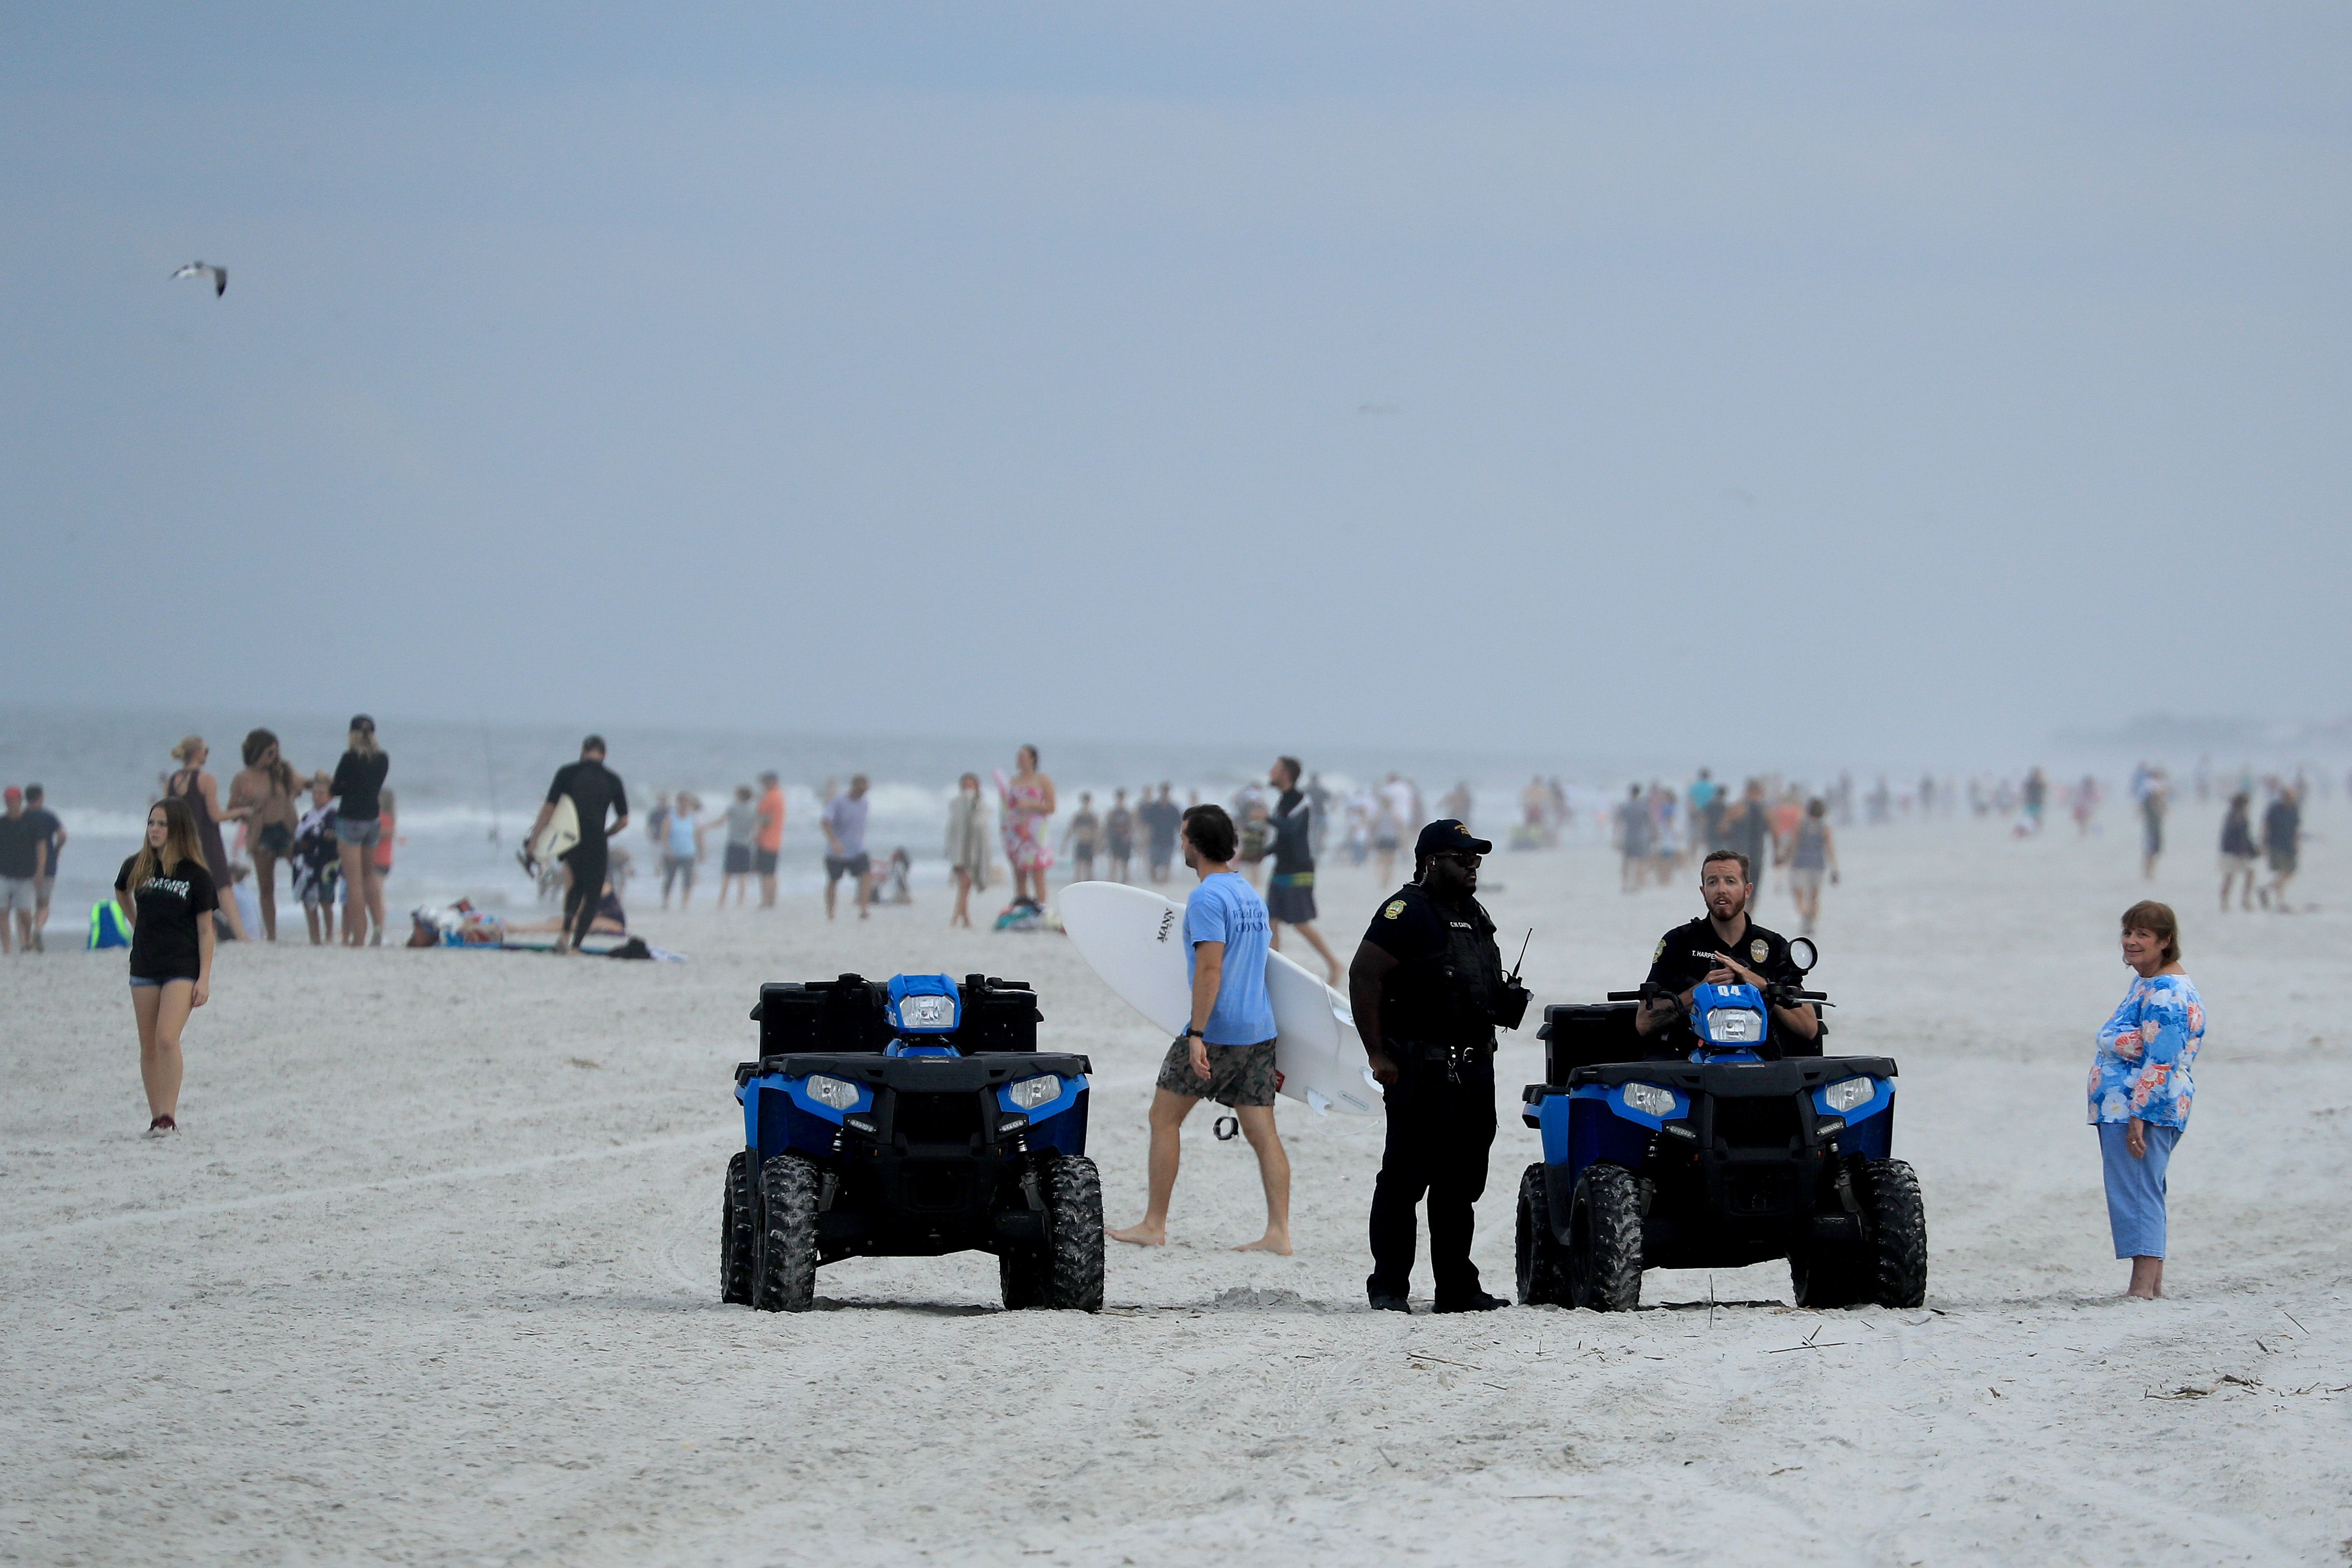 Police are seen speaking to people at the beach on April 19, 2020 in Jacksonville Beach, Florida. 